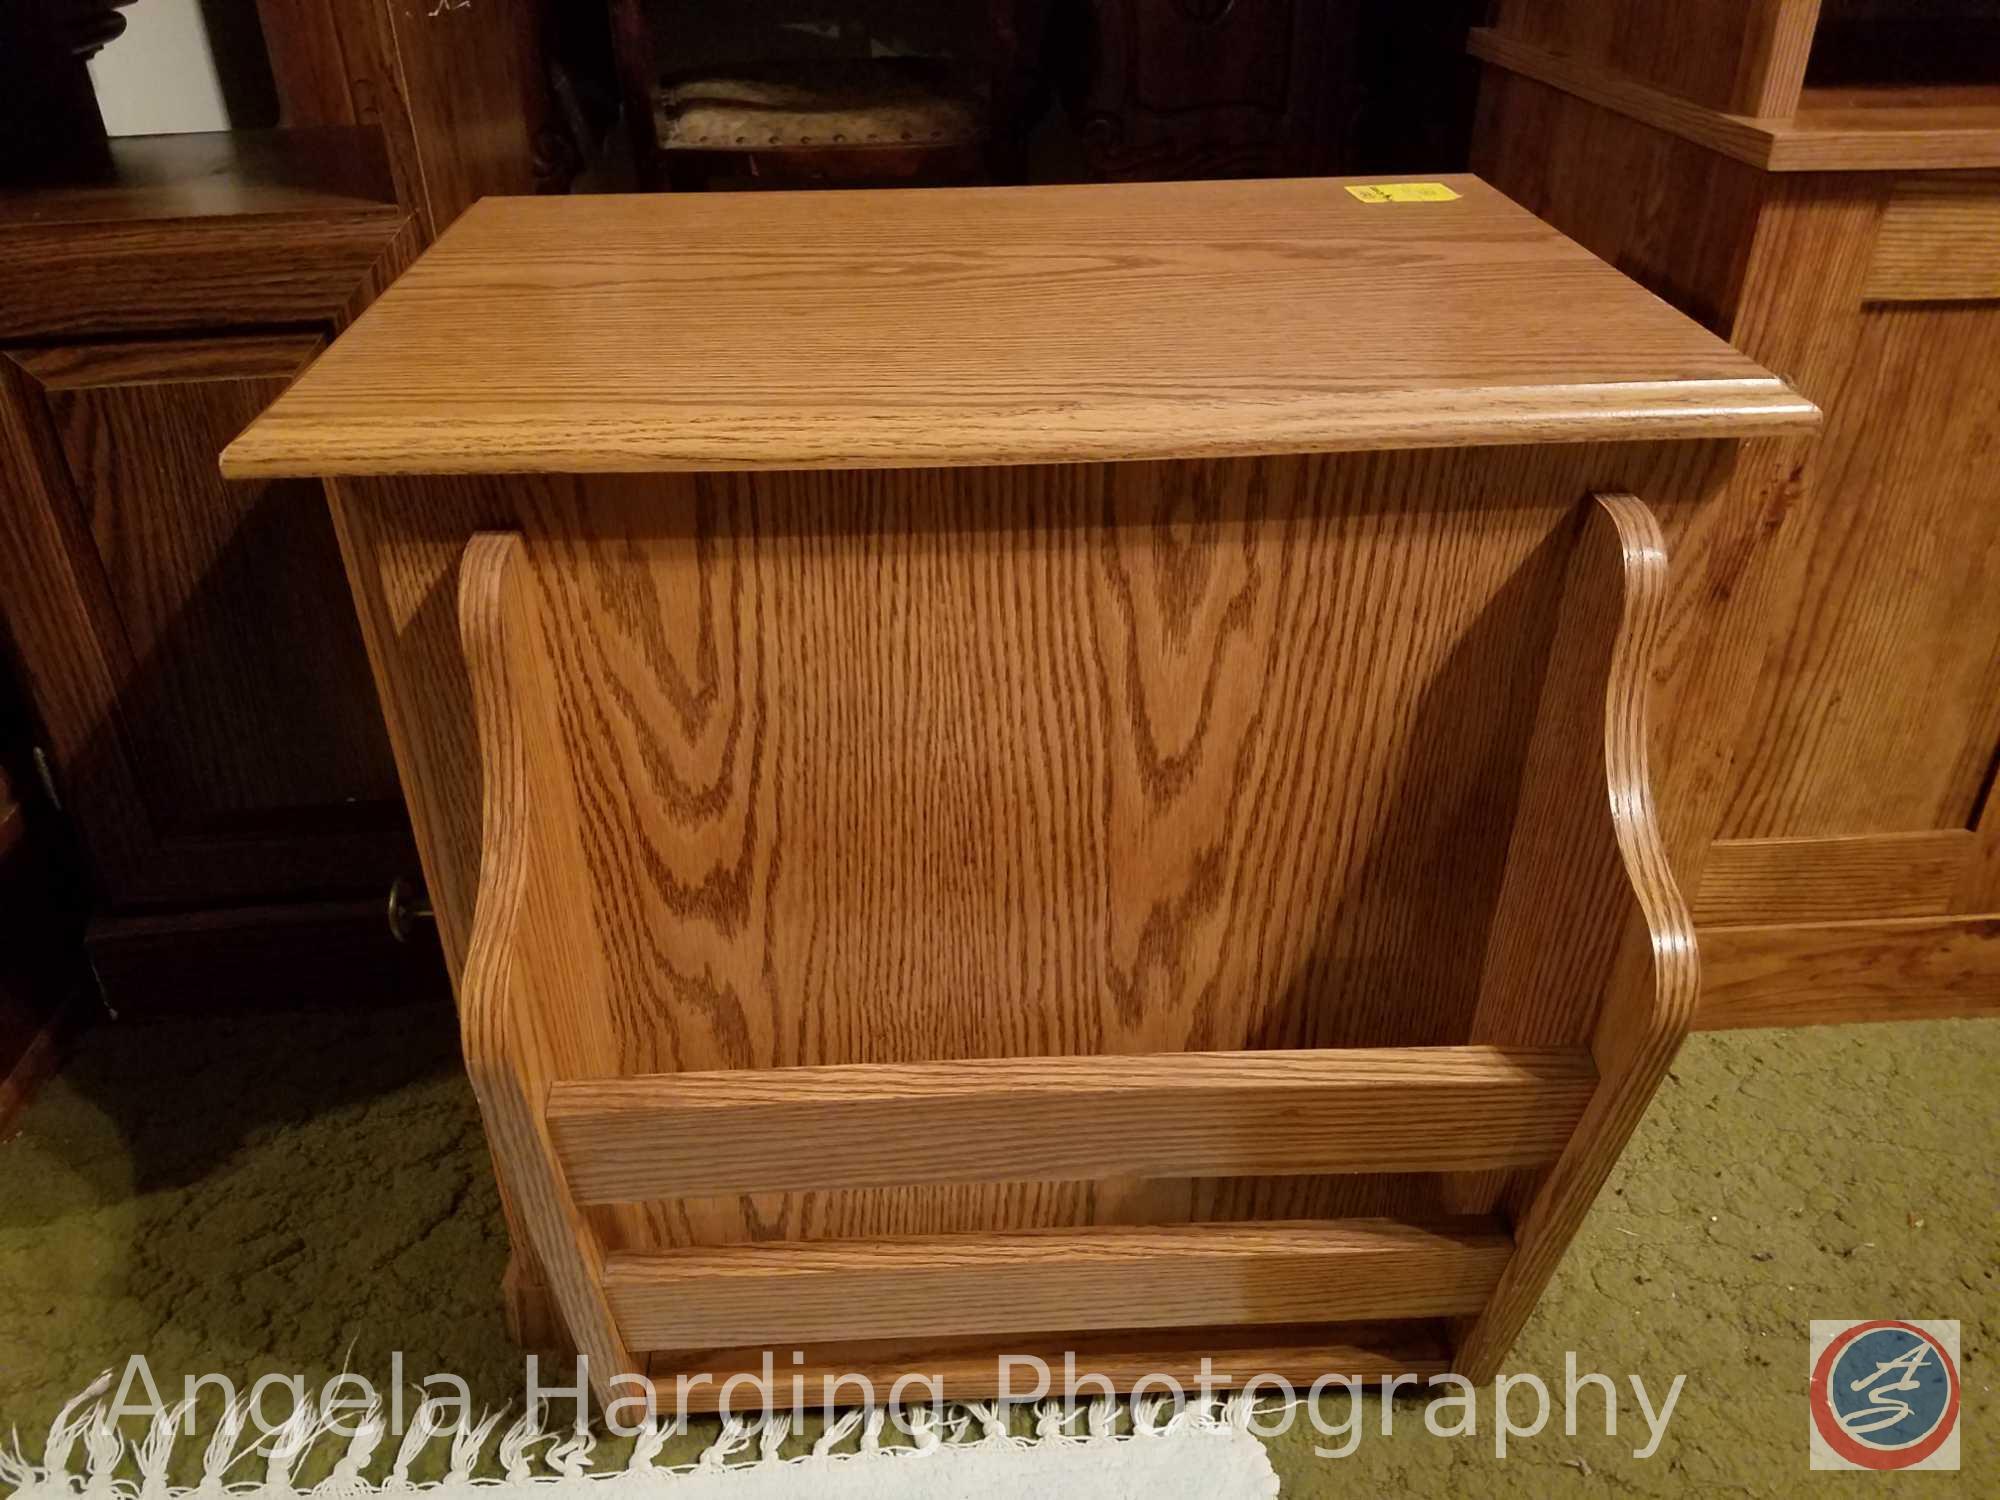 Wood Side Table with (1) Door/(1) Shelf and Magazine Rack 20"x22.5"x20" and Wood Side Table with (1)